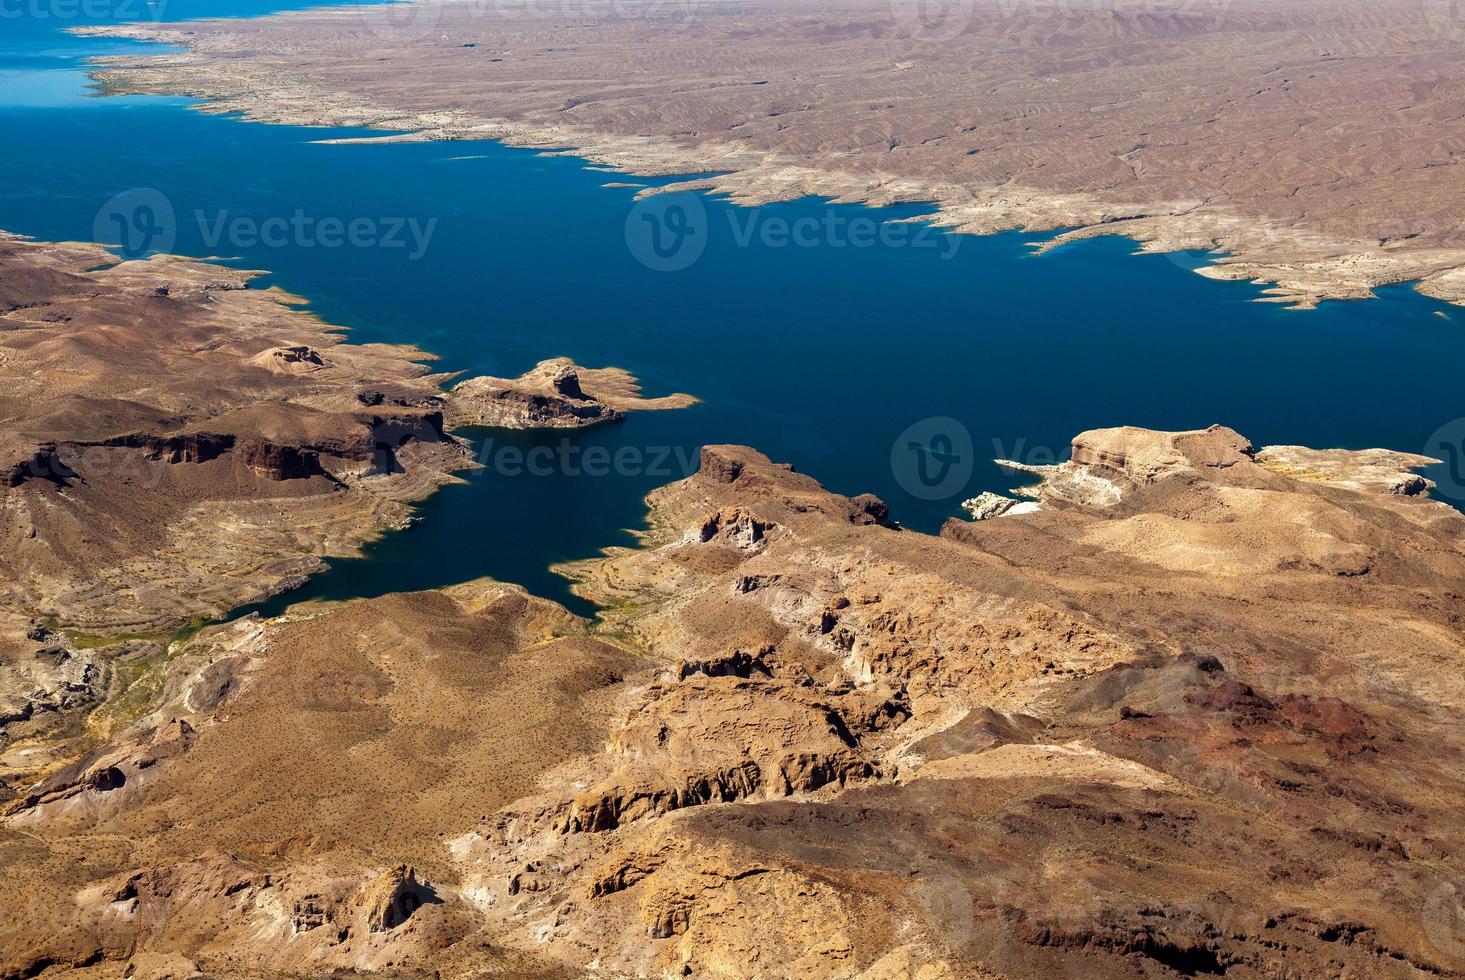 Aerial view of Lake Mead photo